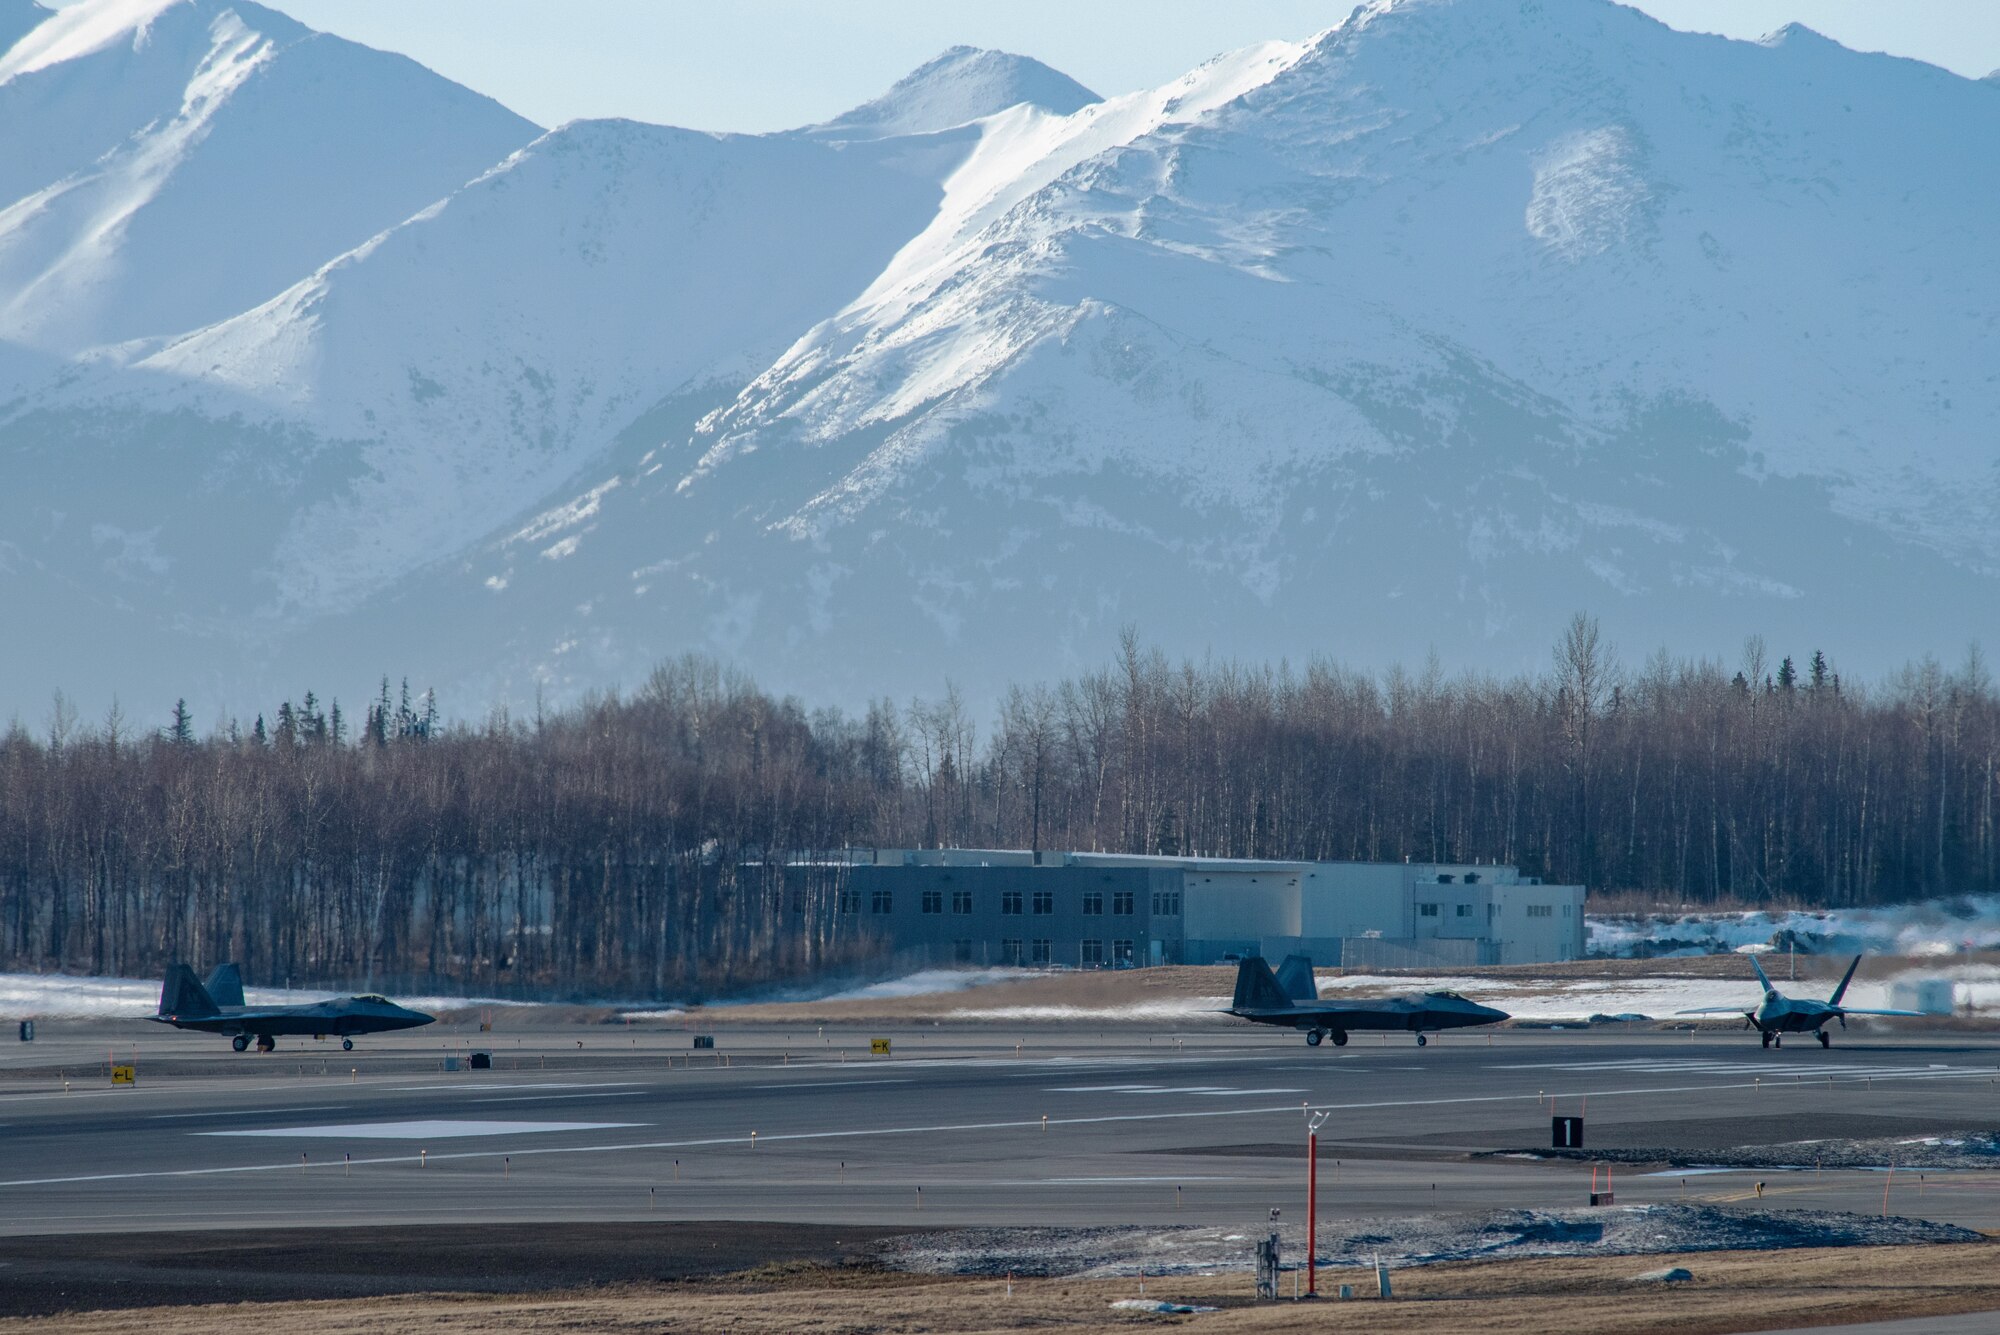 A photo of F-22 Raptors taxiing before takeoff.